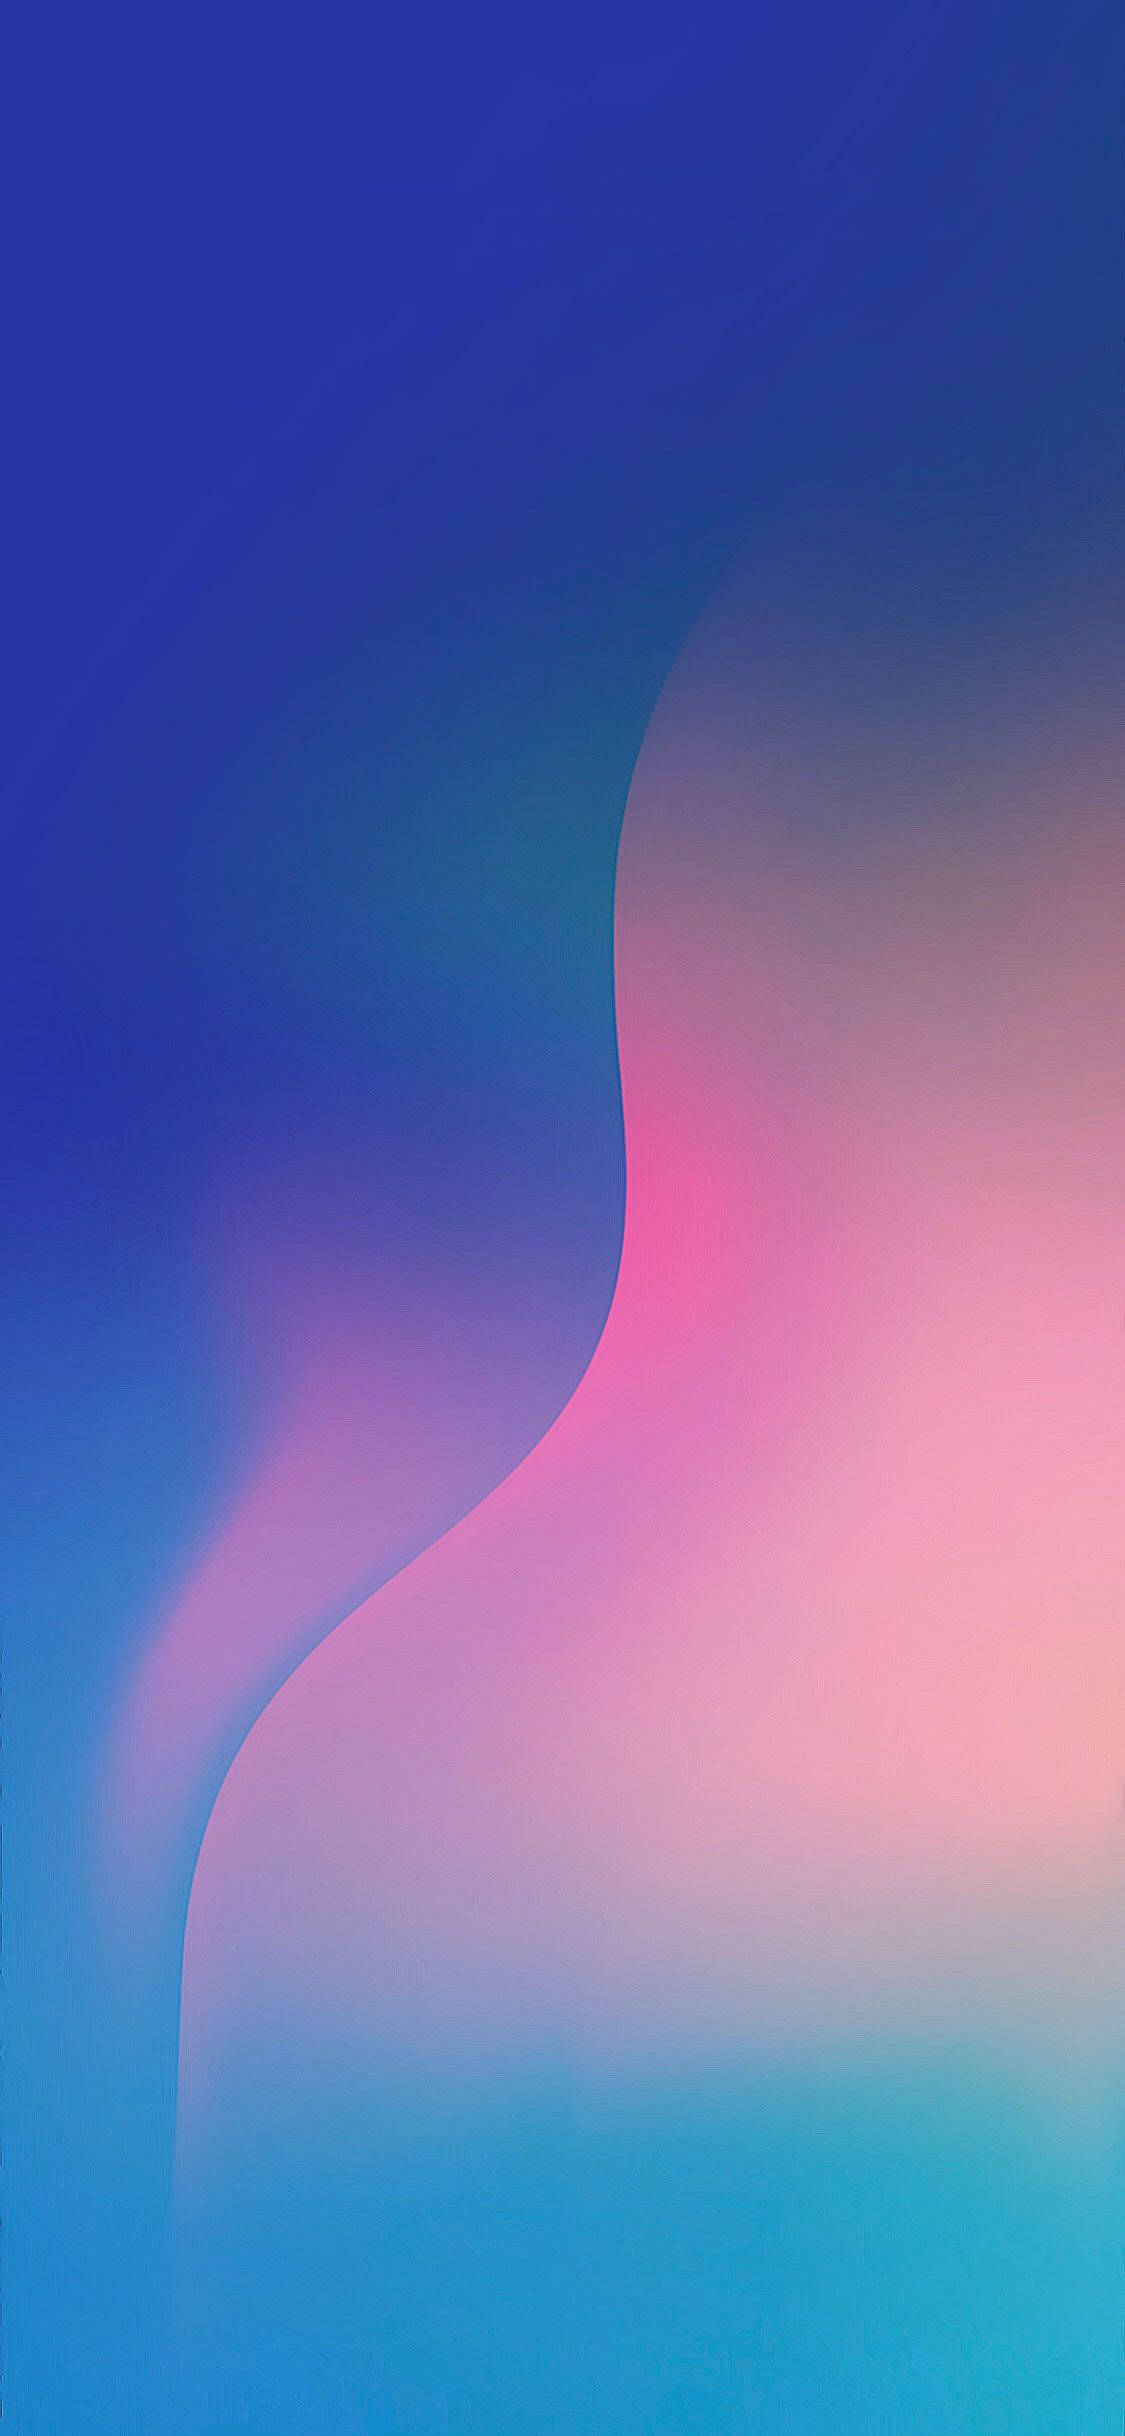 A Blue And Pink Abstract Background With A Woman's Face Background